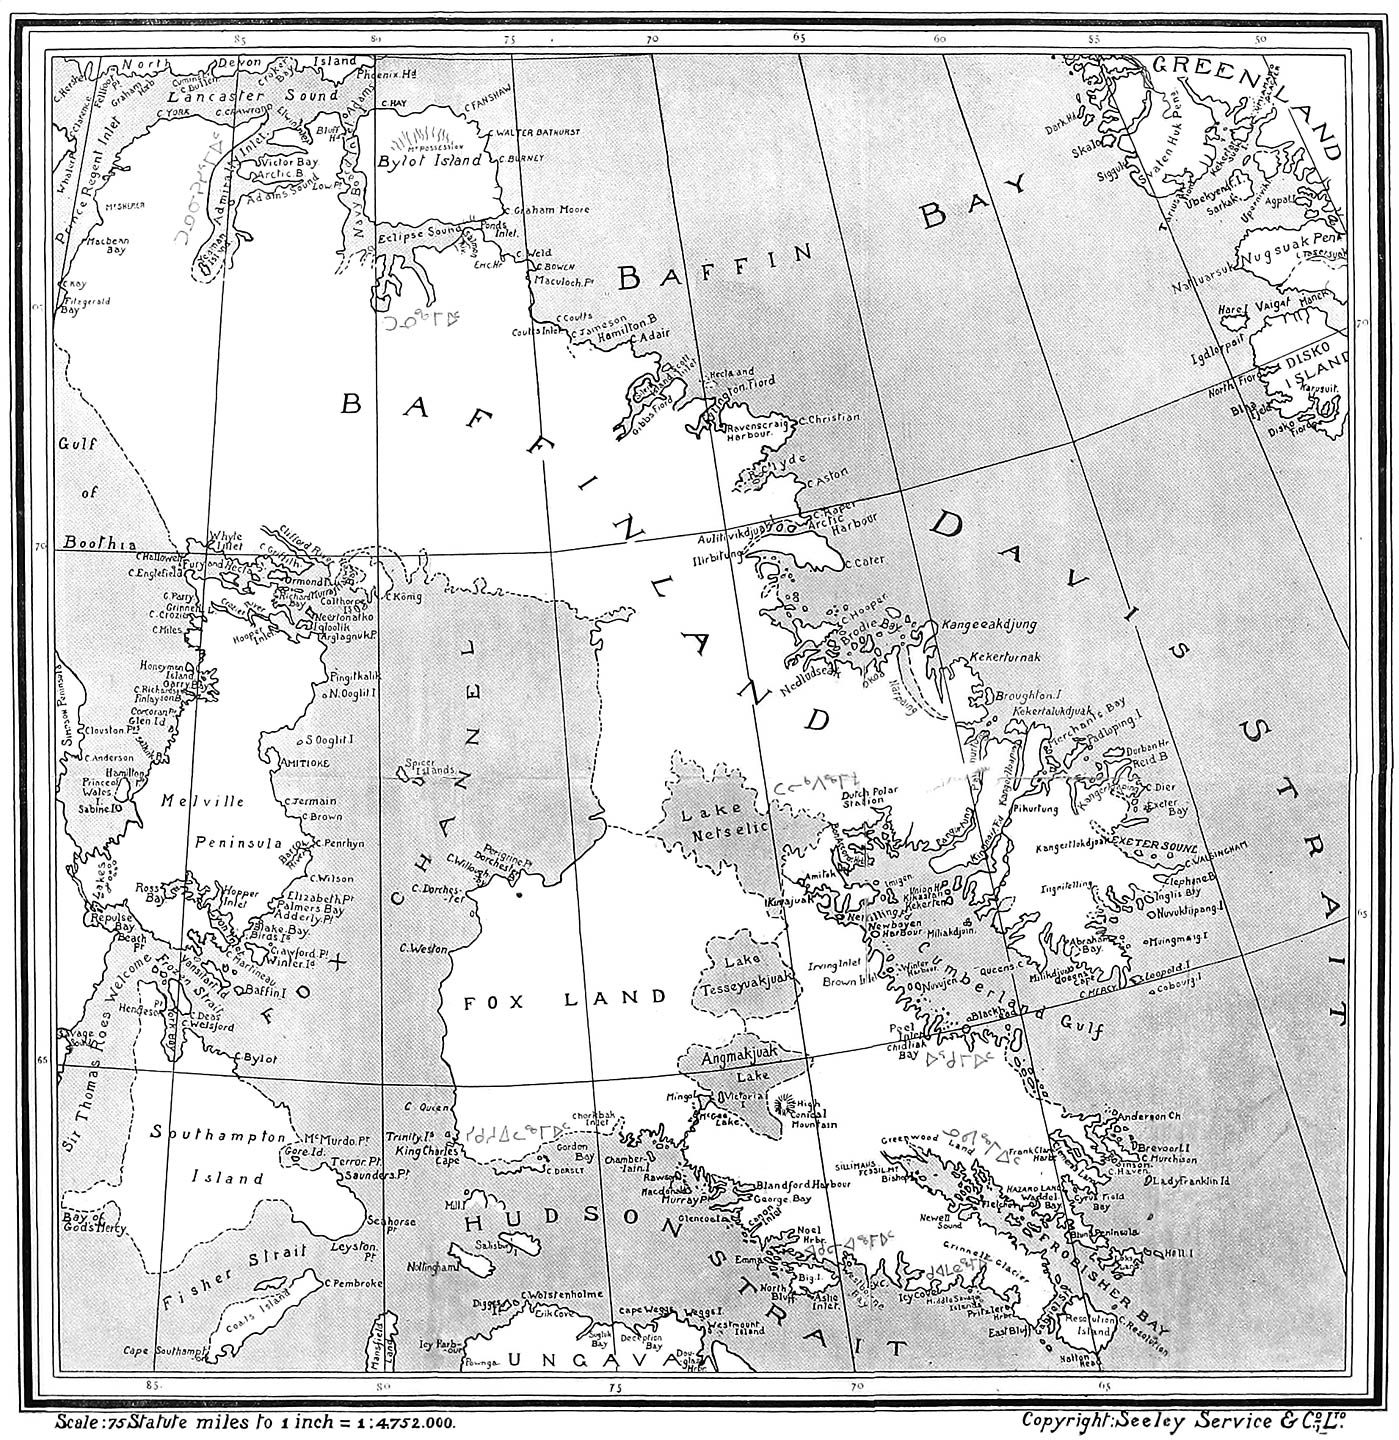 Map for “Among Unknown Eskimo.”